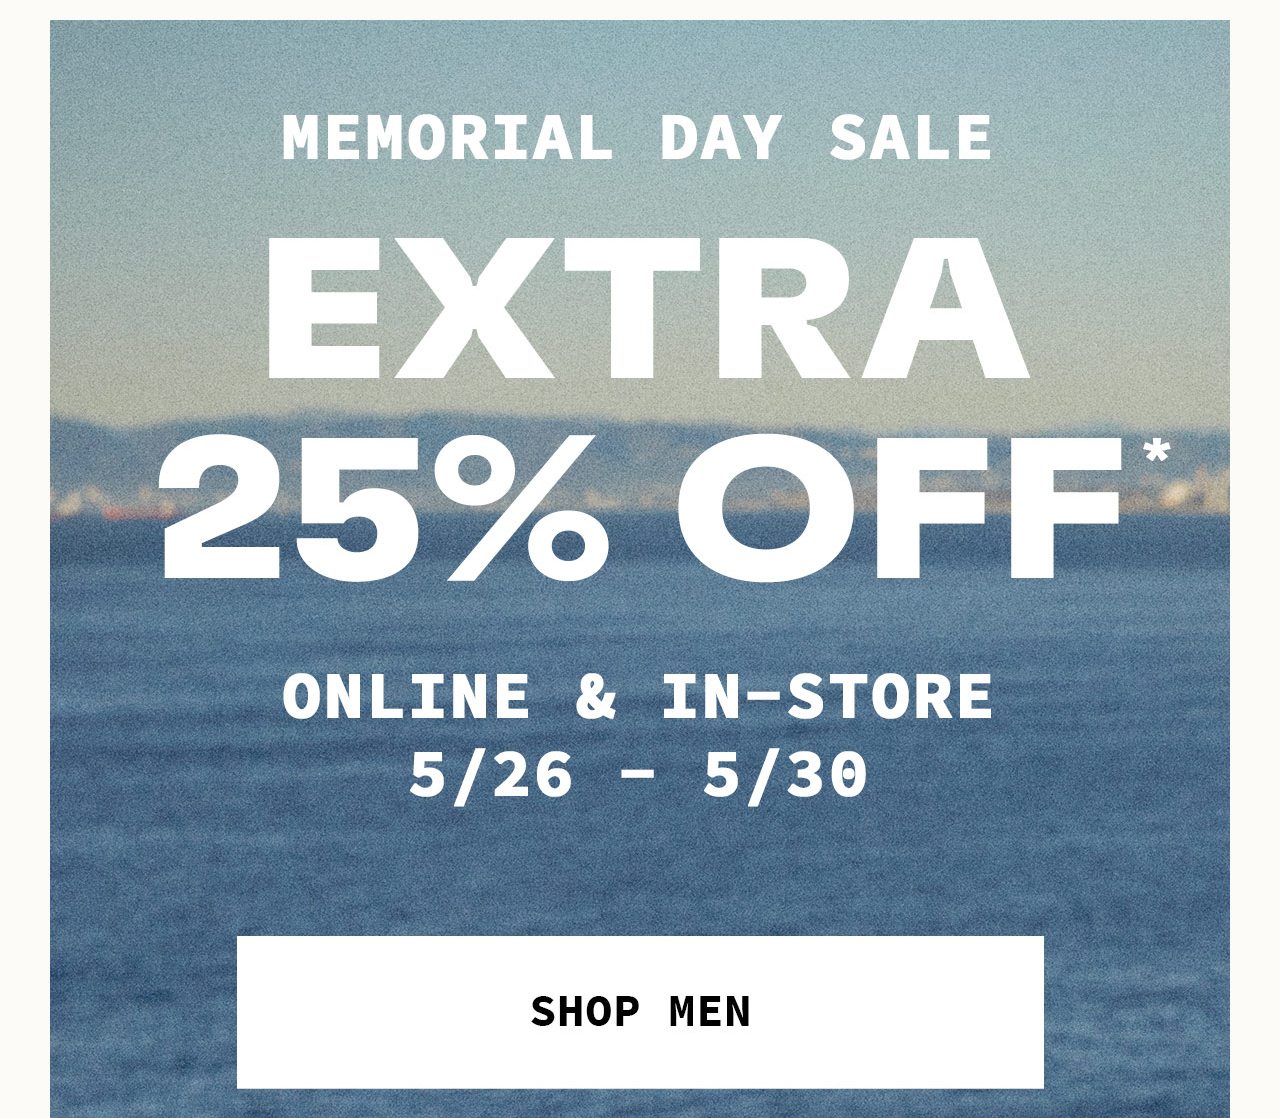 Memorial Day Sale Extra 25% Off Online & In-Store 5/26 - 5/30